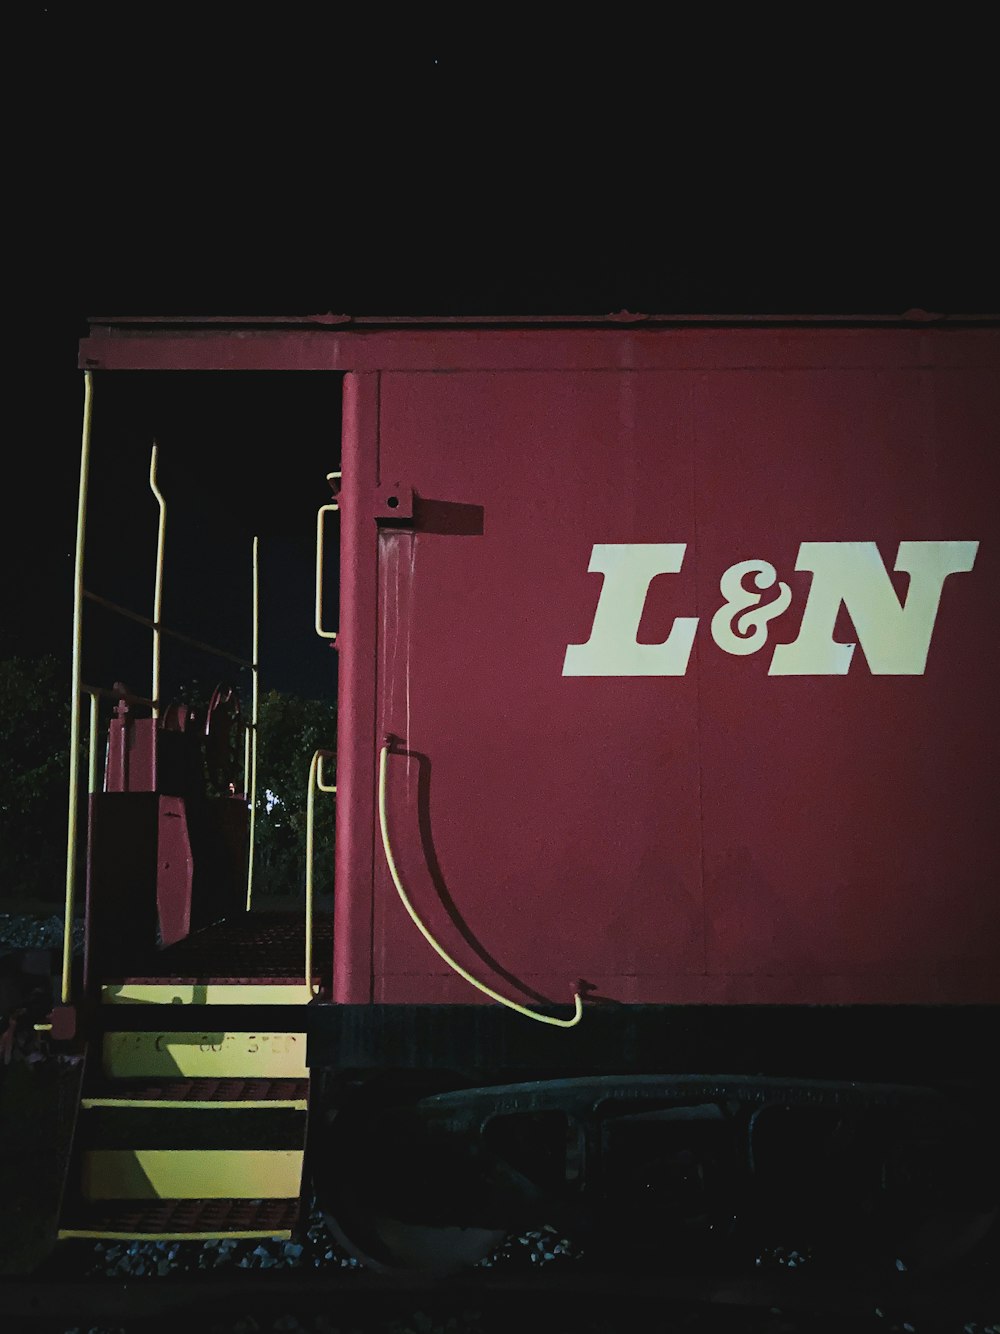 a train car with the l & n logo on it